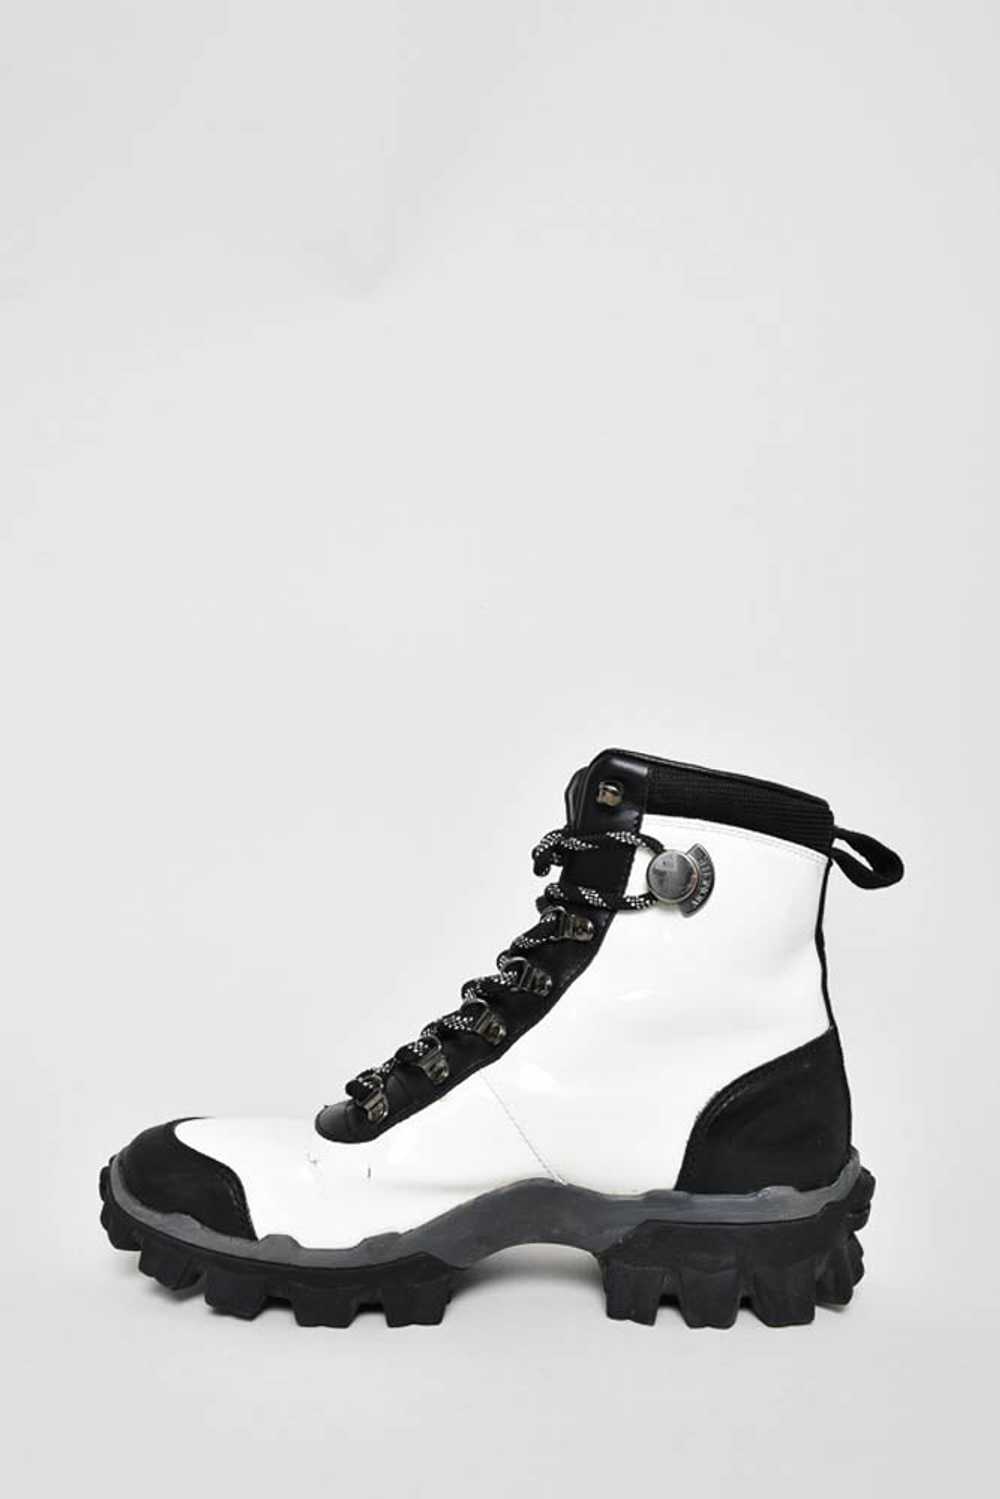 Moncler White Patent/Black Leather Hiking Boots S… - image 3